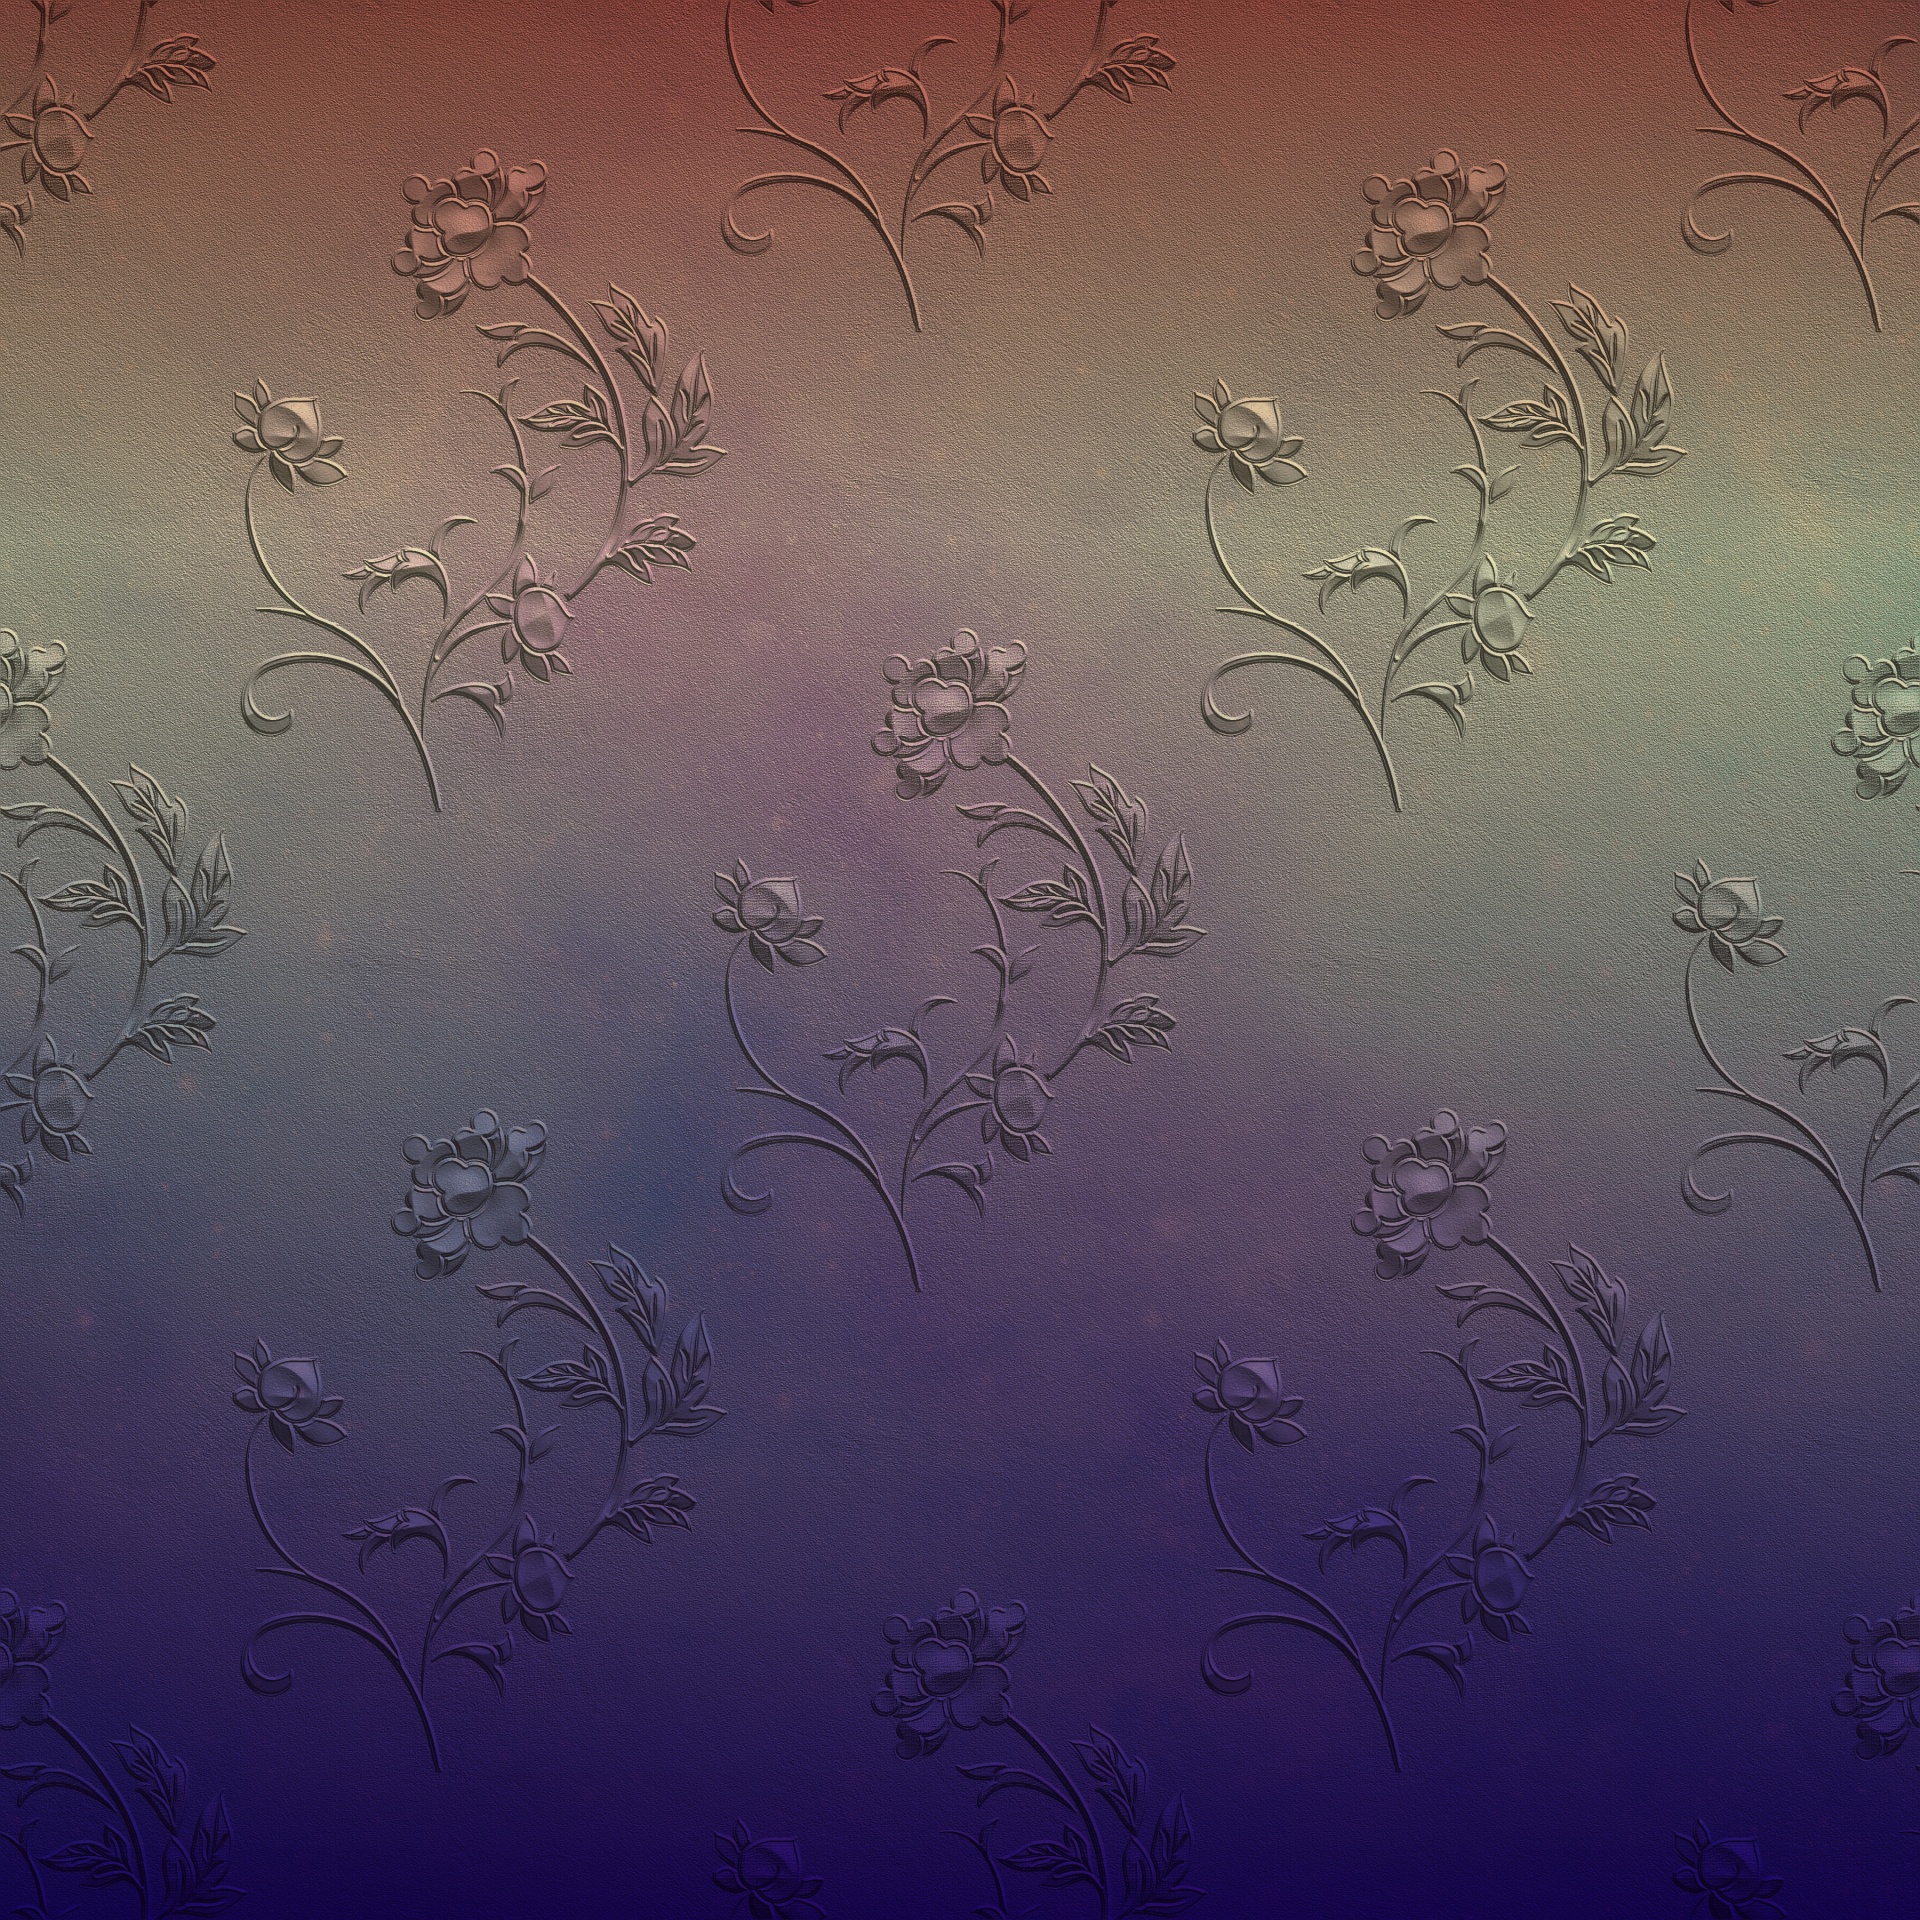 Gradient texture background for art and craft projects.